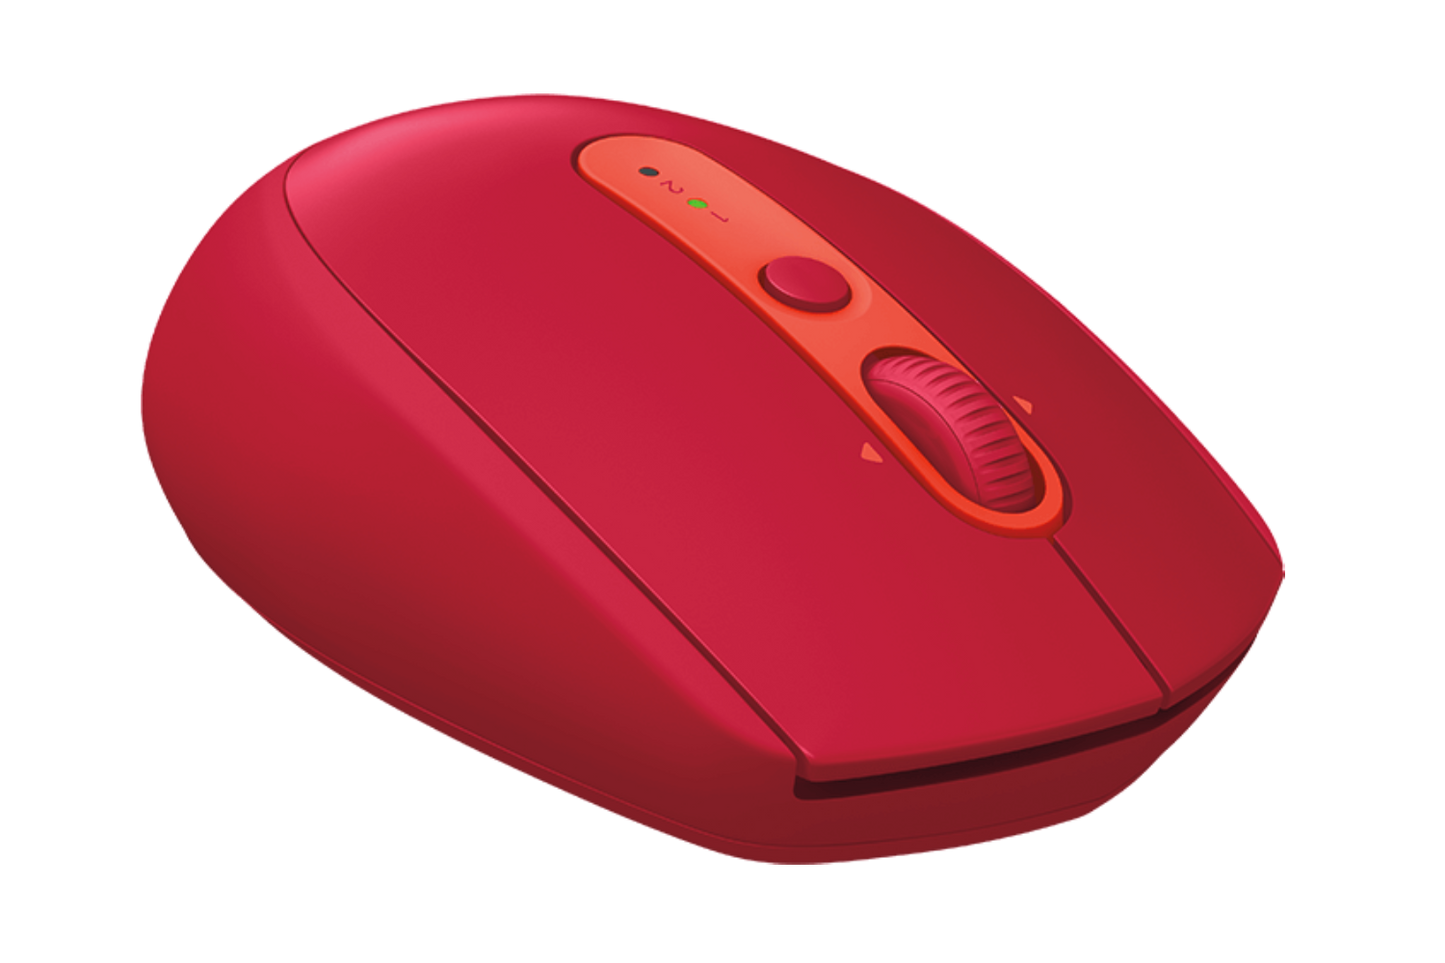 Logitech M590 Multi-Devices Wireless Silent Mouse Ruby